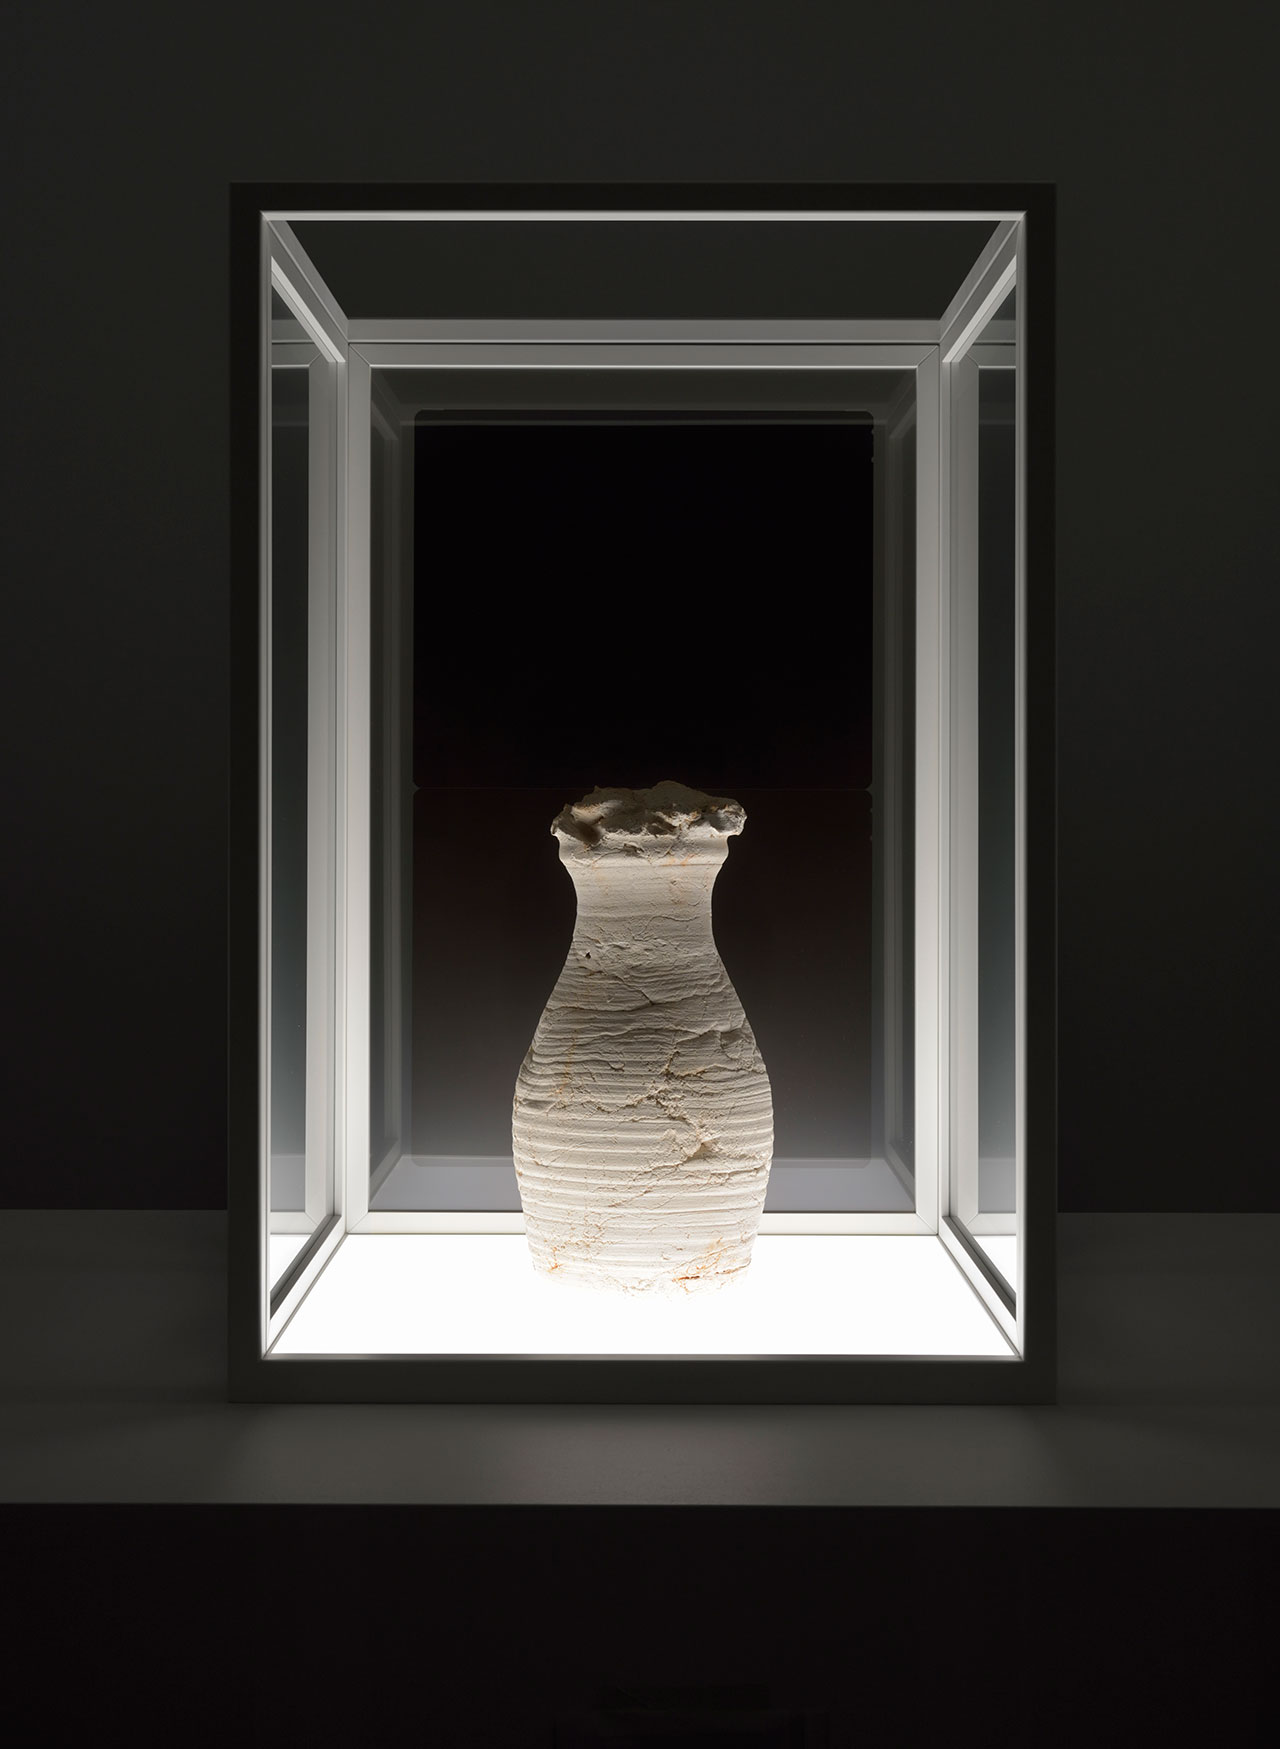 Giuseppe Penone, Il vuoto del vaso (The void of the vase) , 2005. Terracotta, 3 X-raysTerracotta: 16 ½ x 9 5/8 in. (42 x 24.5 cm)Metal structure: 34 13/16 in. (88.5 x 60 x 60 cm). Photo by Rebecca Fanuele. Courtesy the artist and Marian Goodman Gallery.